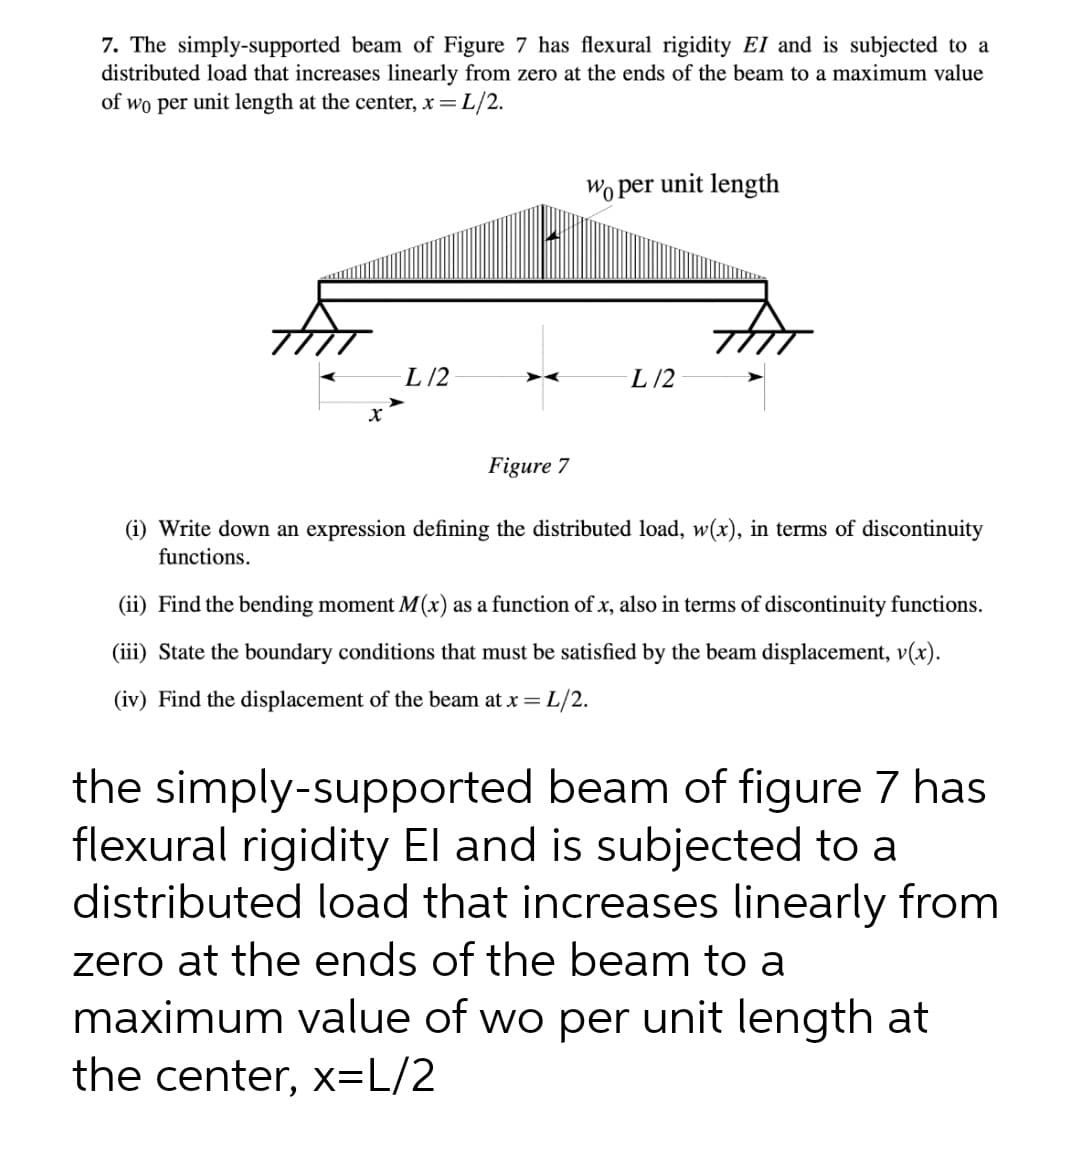 7. The simply-supported beam of Figure 7 has flexural rigidity EI and is subjected to a
distributed load that increases linearly from zero at the ends of the beam to a maximum value
of wo per unit length at the center, x = L/2.
Wo per unit length
L /2
L/2
Figure 7
(i) Write down an expression defining the distributed load, w(x), in terms of discontinuity
functions.
(ii) Find the bending moment M(x) as a function of x, also in terms of discontinuity functions.
(iii) State the boundary conditions that must be satisfied by the beam displacement, v(x).
(iv) Find the displacement of the beam at x =
L/2.
the simply-supported beam of figure 7 has
flexural rigidity El and is subjected to a
distributed load that increases linearly from
zero at the ends of the beam to a
maximum value of wo per unit length at
the center, x=L/2
